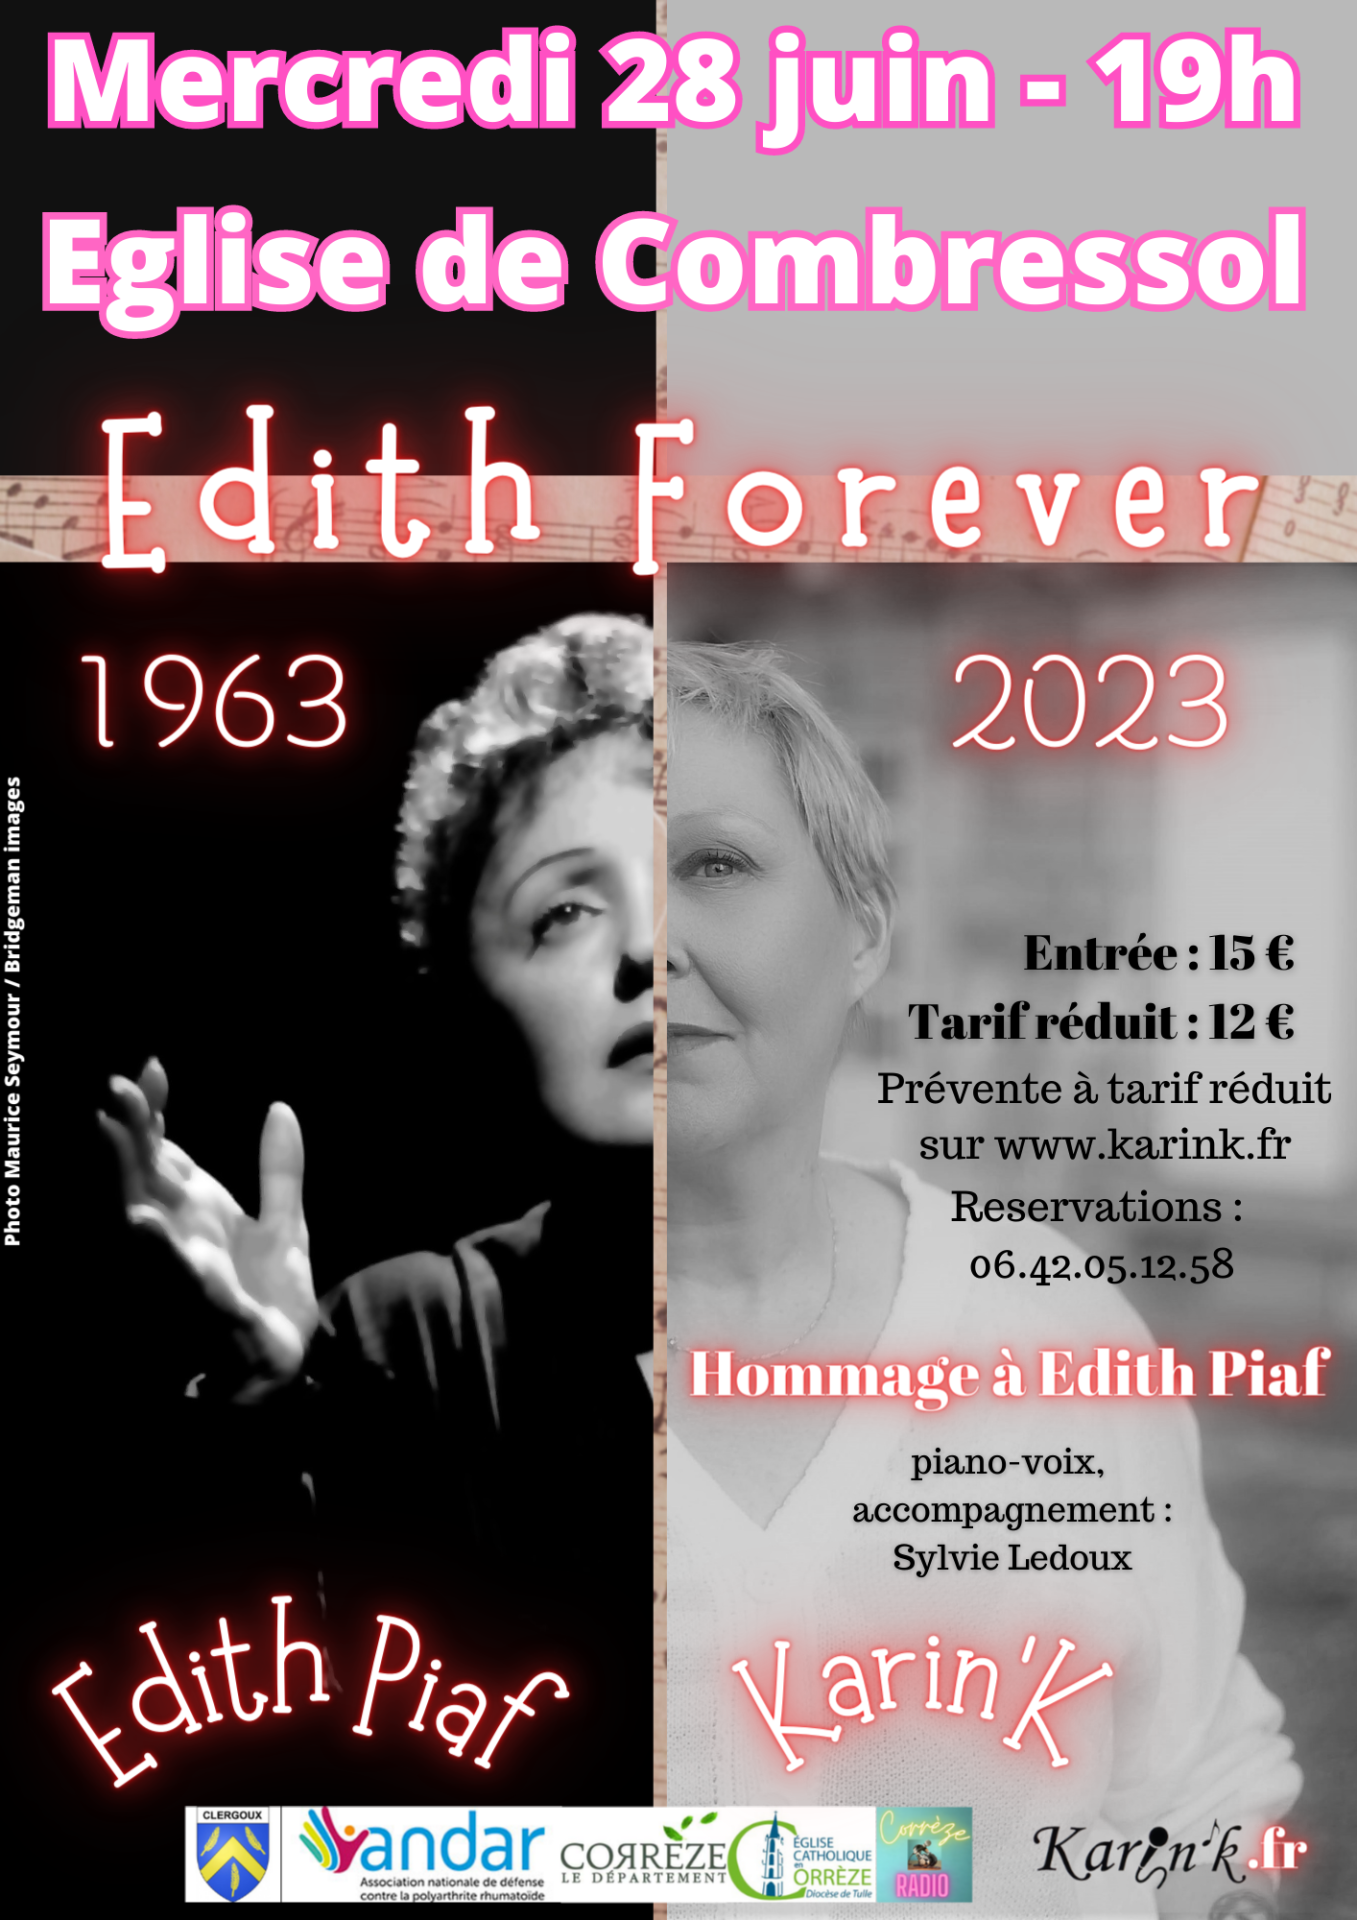 Edith forever naves